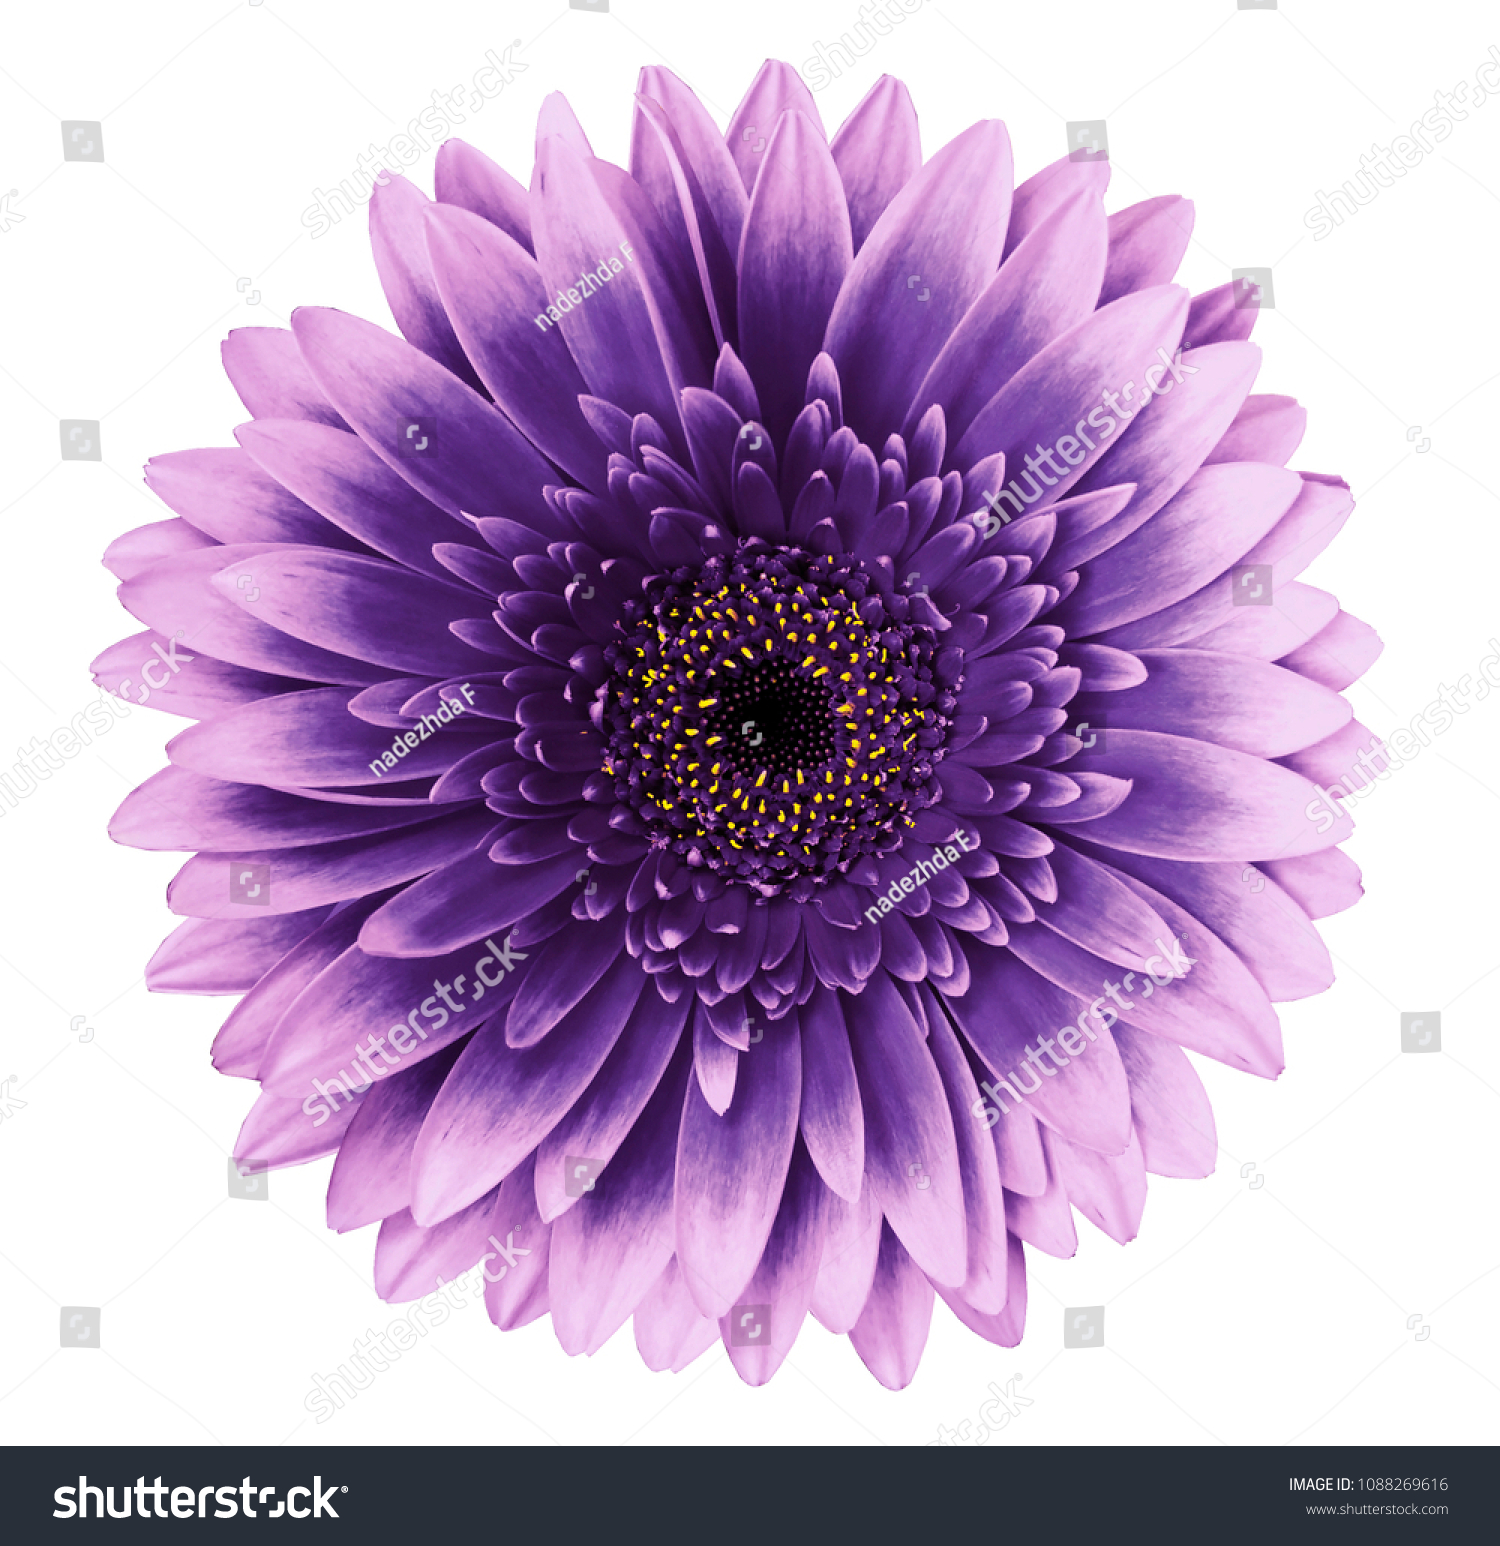 Violet-pink gerbera flower on a white isolated background with clipping path.   Closeup.   For design.  Nature. #1088269616